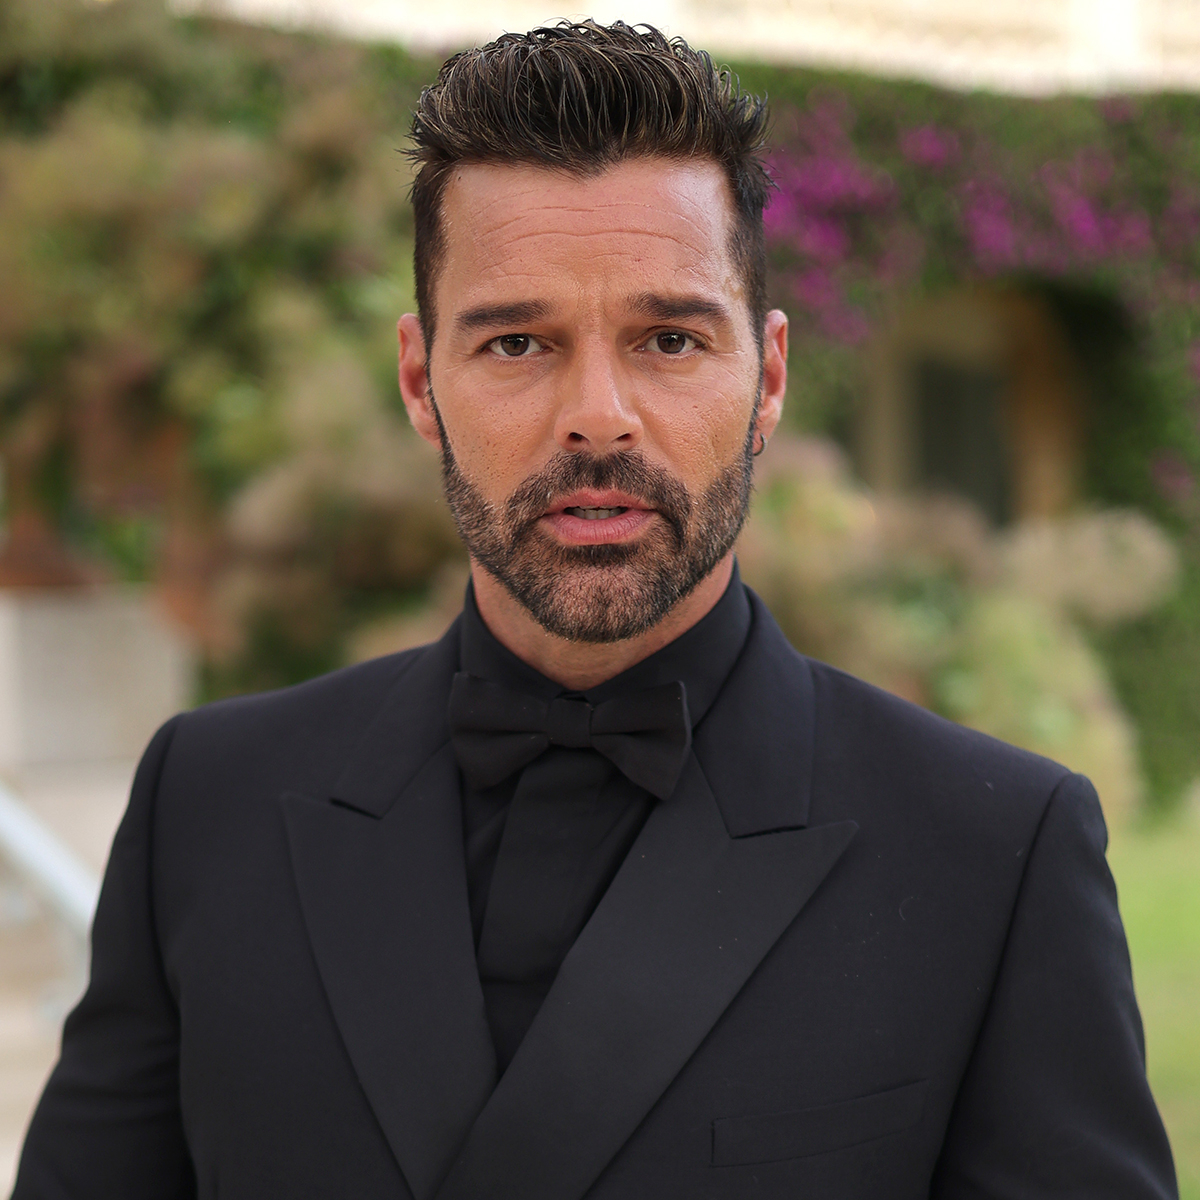 Ricky Martin Denies “Sexual or Romantic Relationship” With Nephew